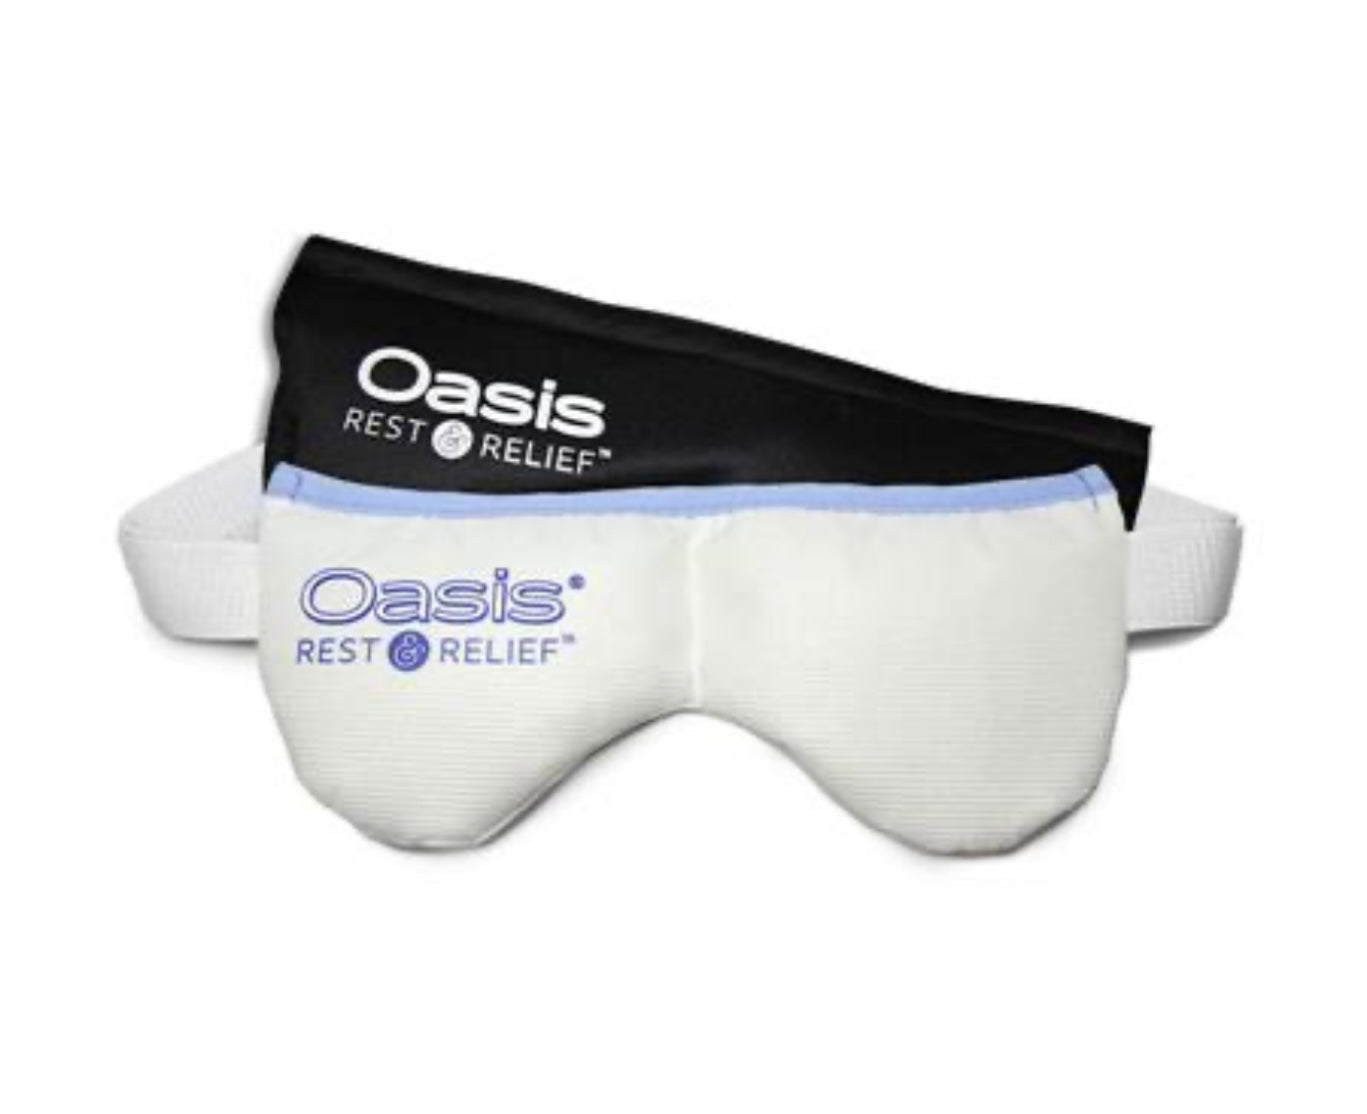 OASIS REST & RELIEF® Hot & Cold Eye Mask